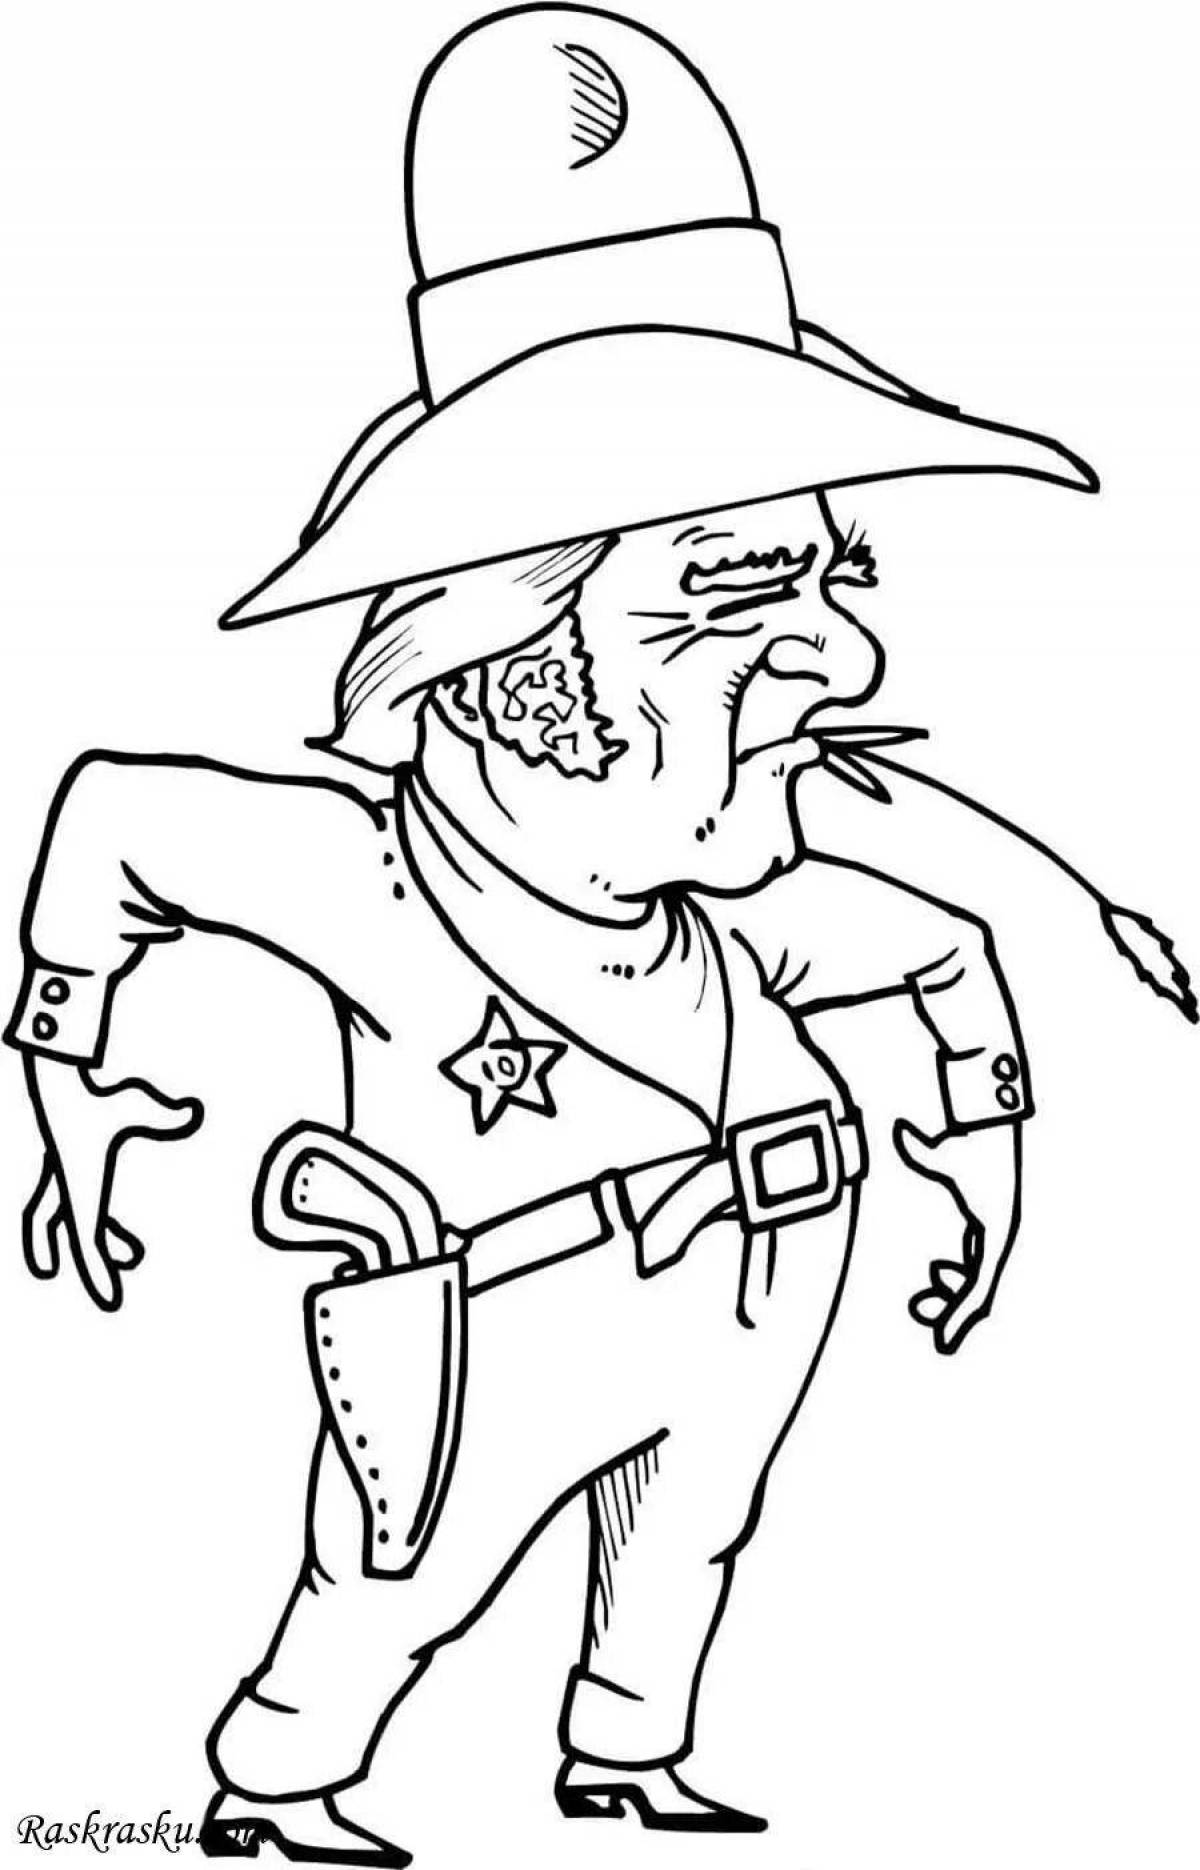 Bright sheriff coloring page